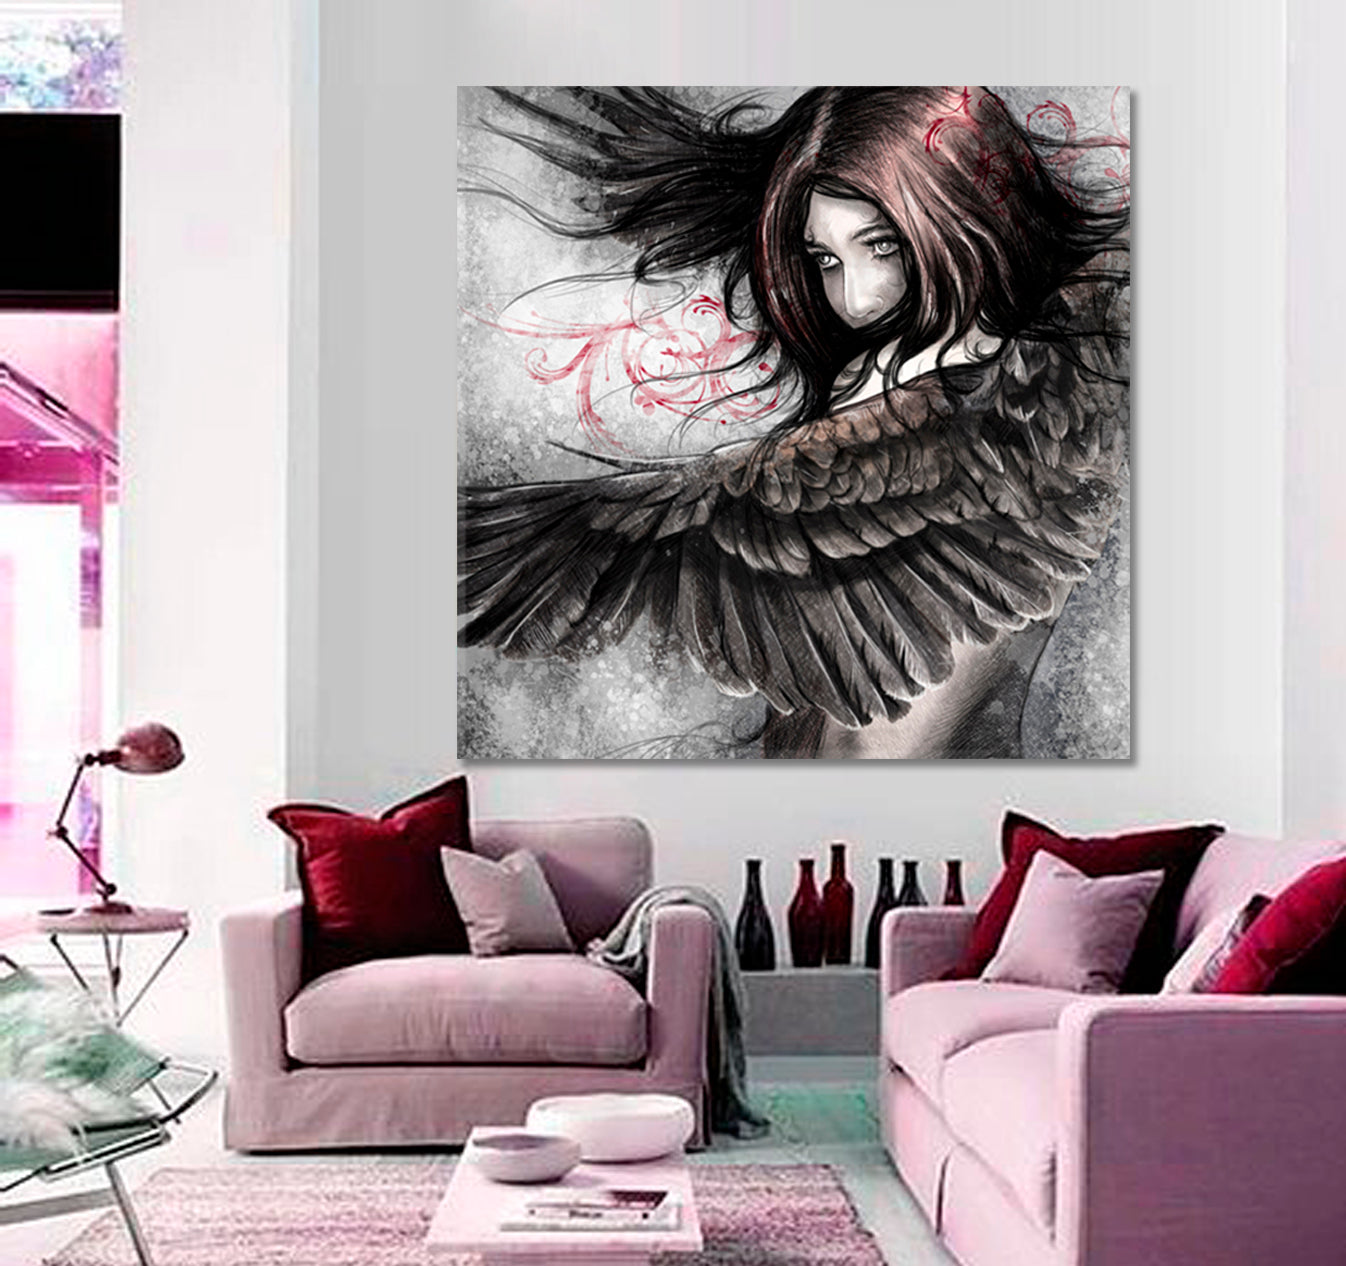 CHASING A DREAM  Beautiful Girl with Eagle Wings Fantasy Concept  - Square Panel Abstract Art Print Artesty   